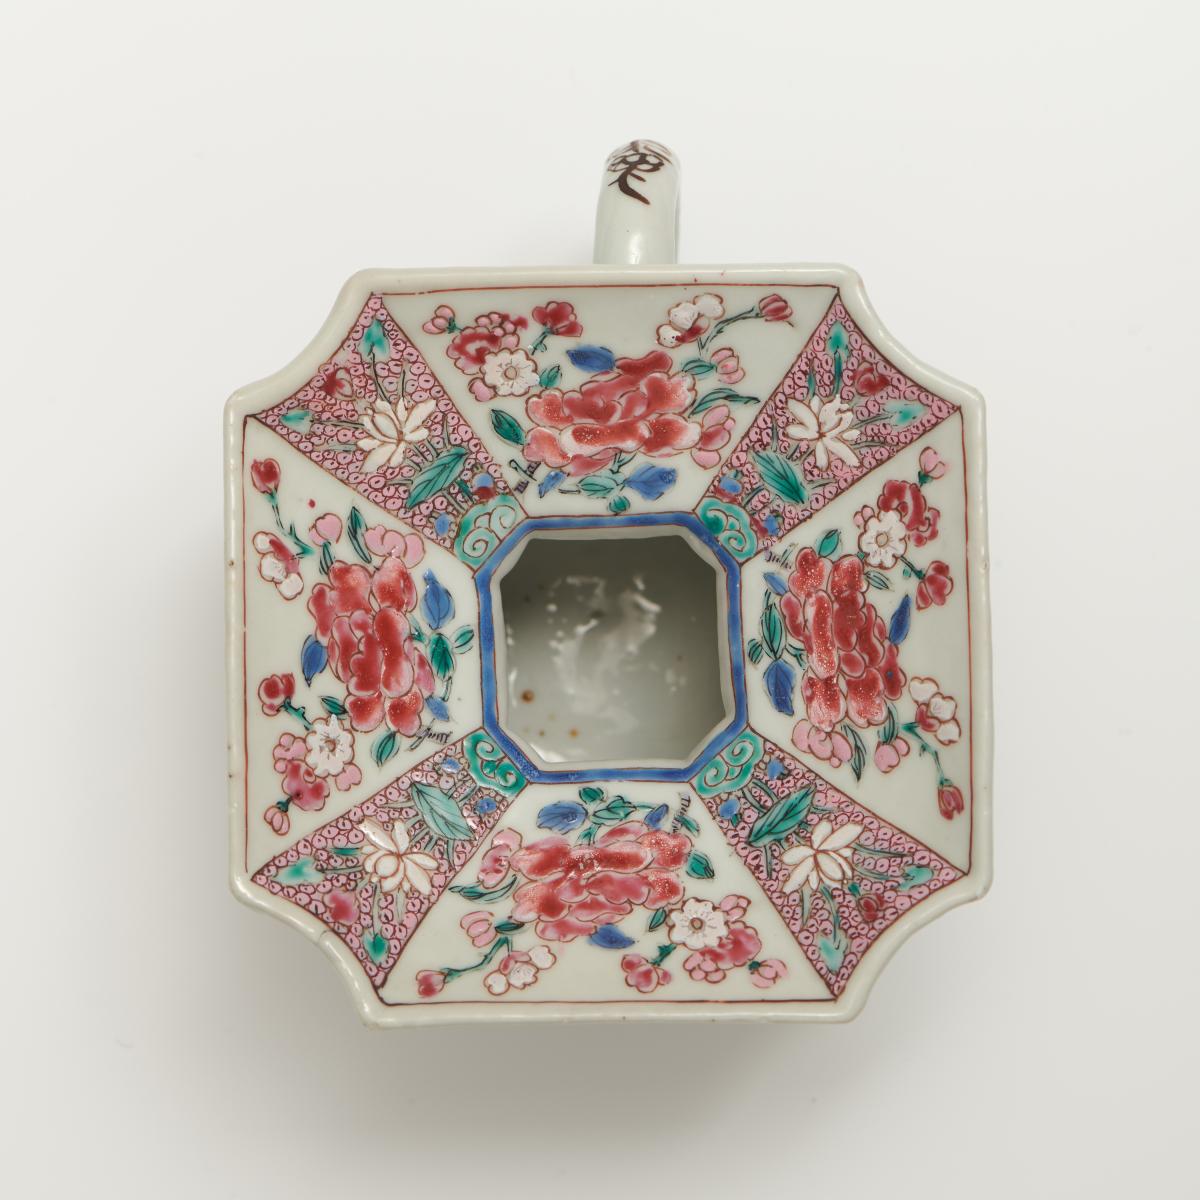 Chinese export porcelain eight-sided spittoon, circa 1735, Yongzheng